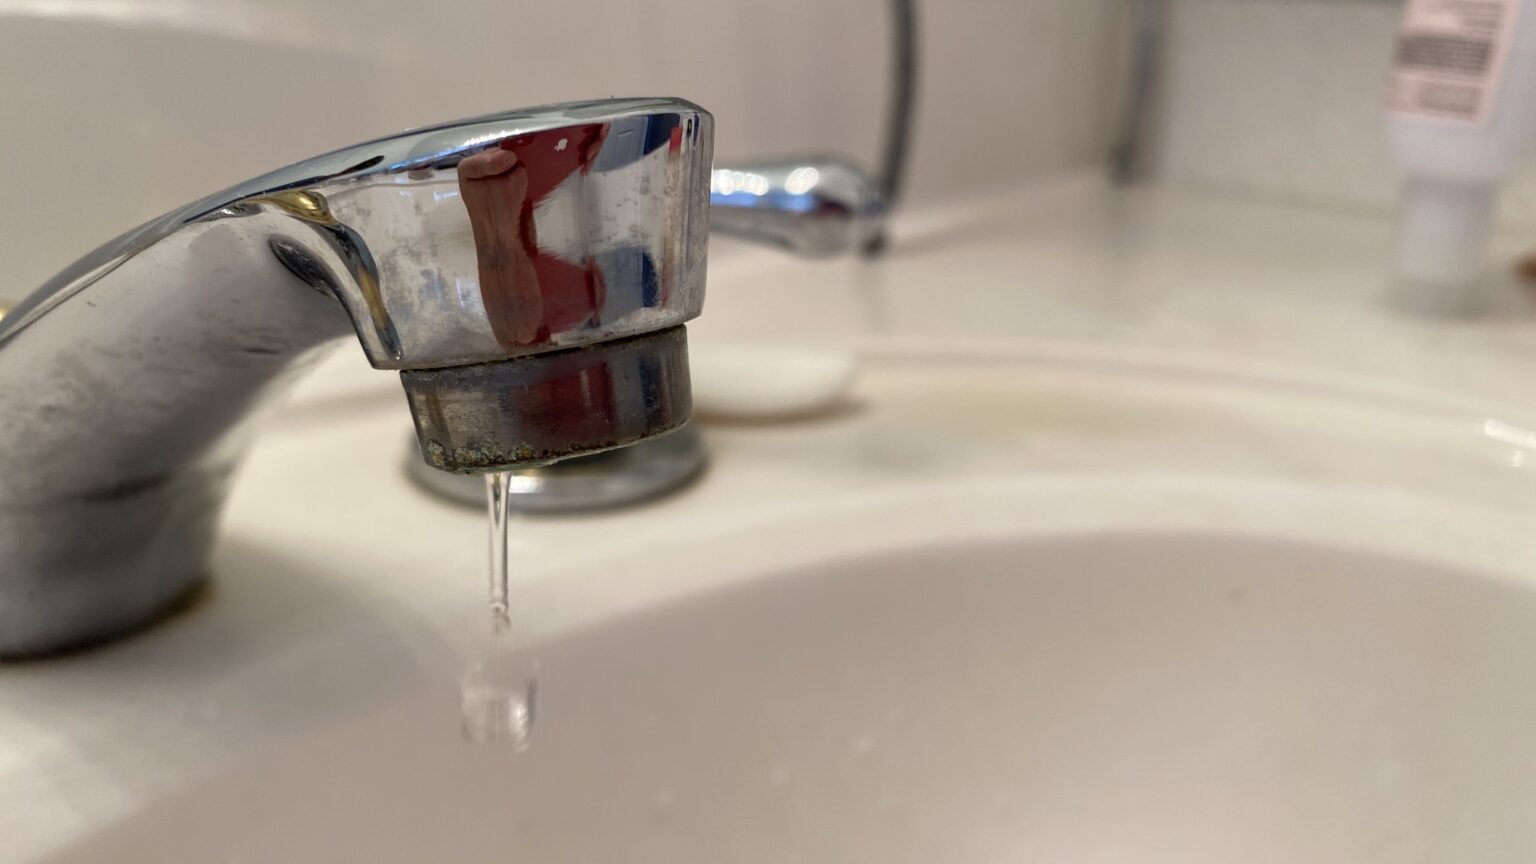 A faucet drips